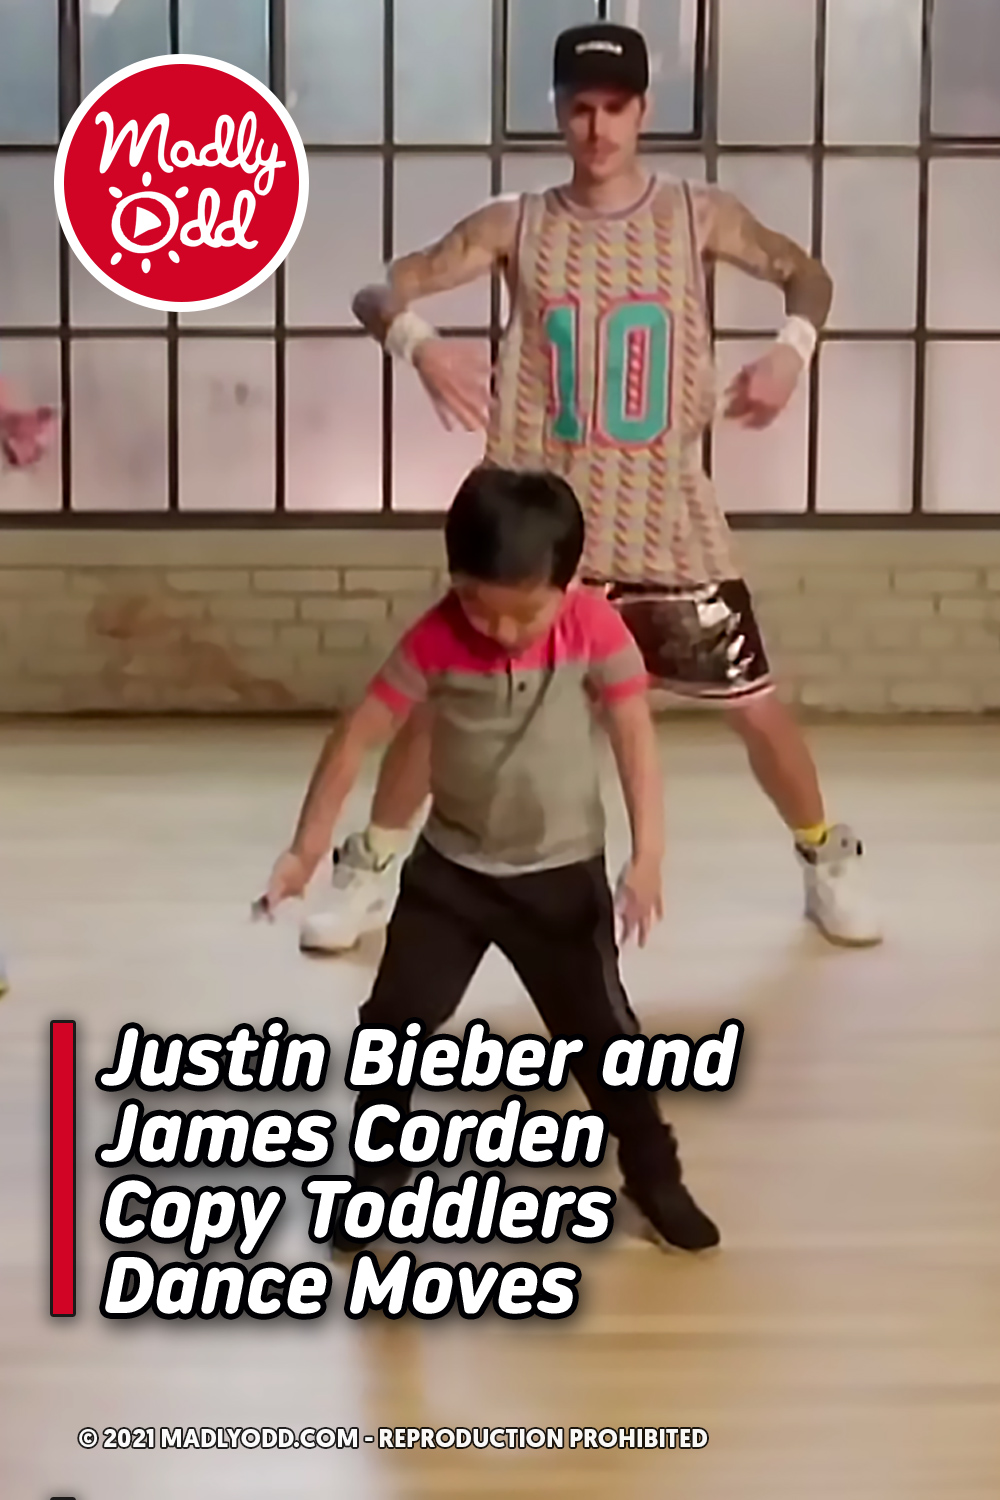 Justin Bieber and James Corden Copy Toddlers Dance Moves